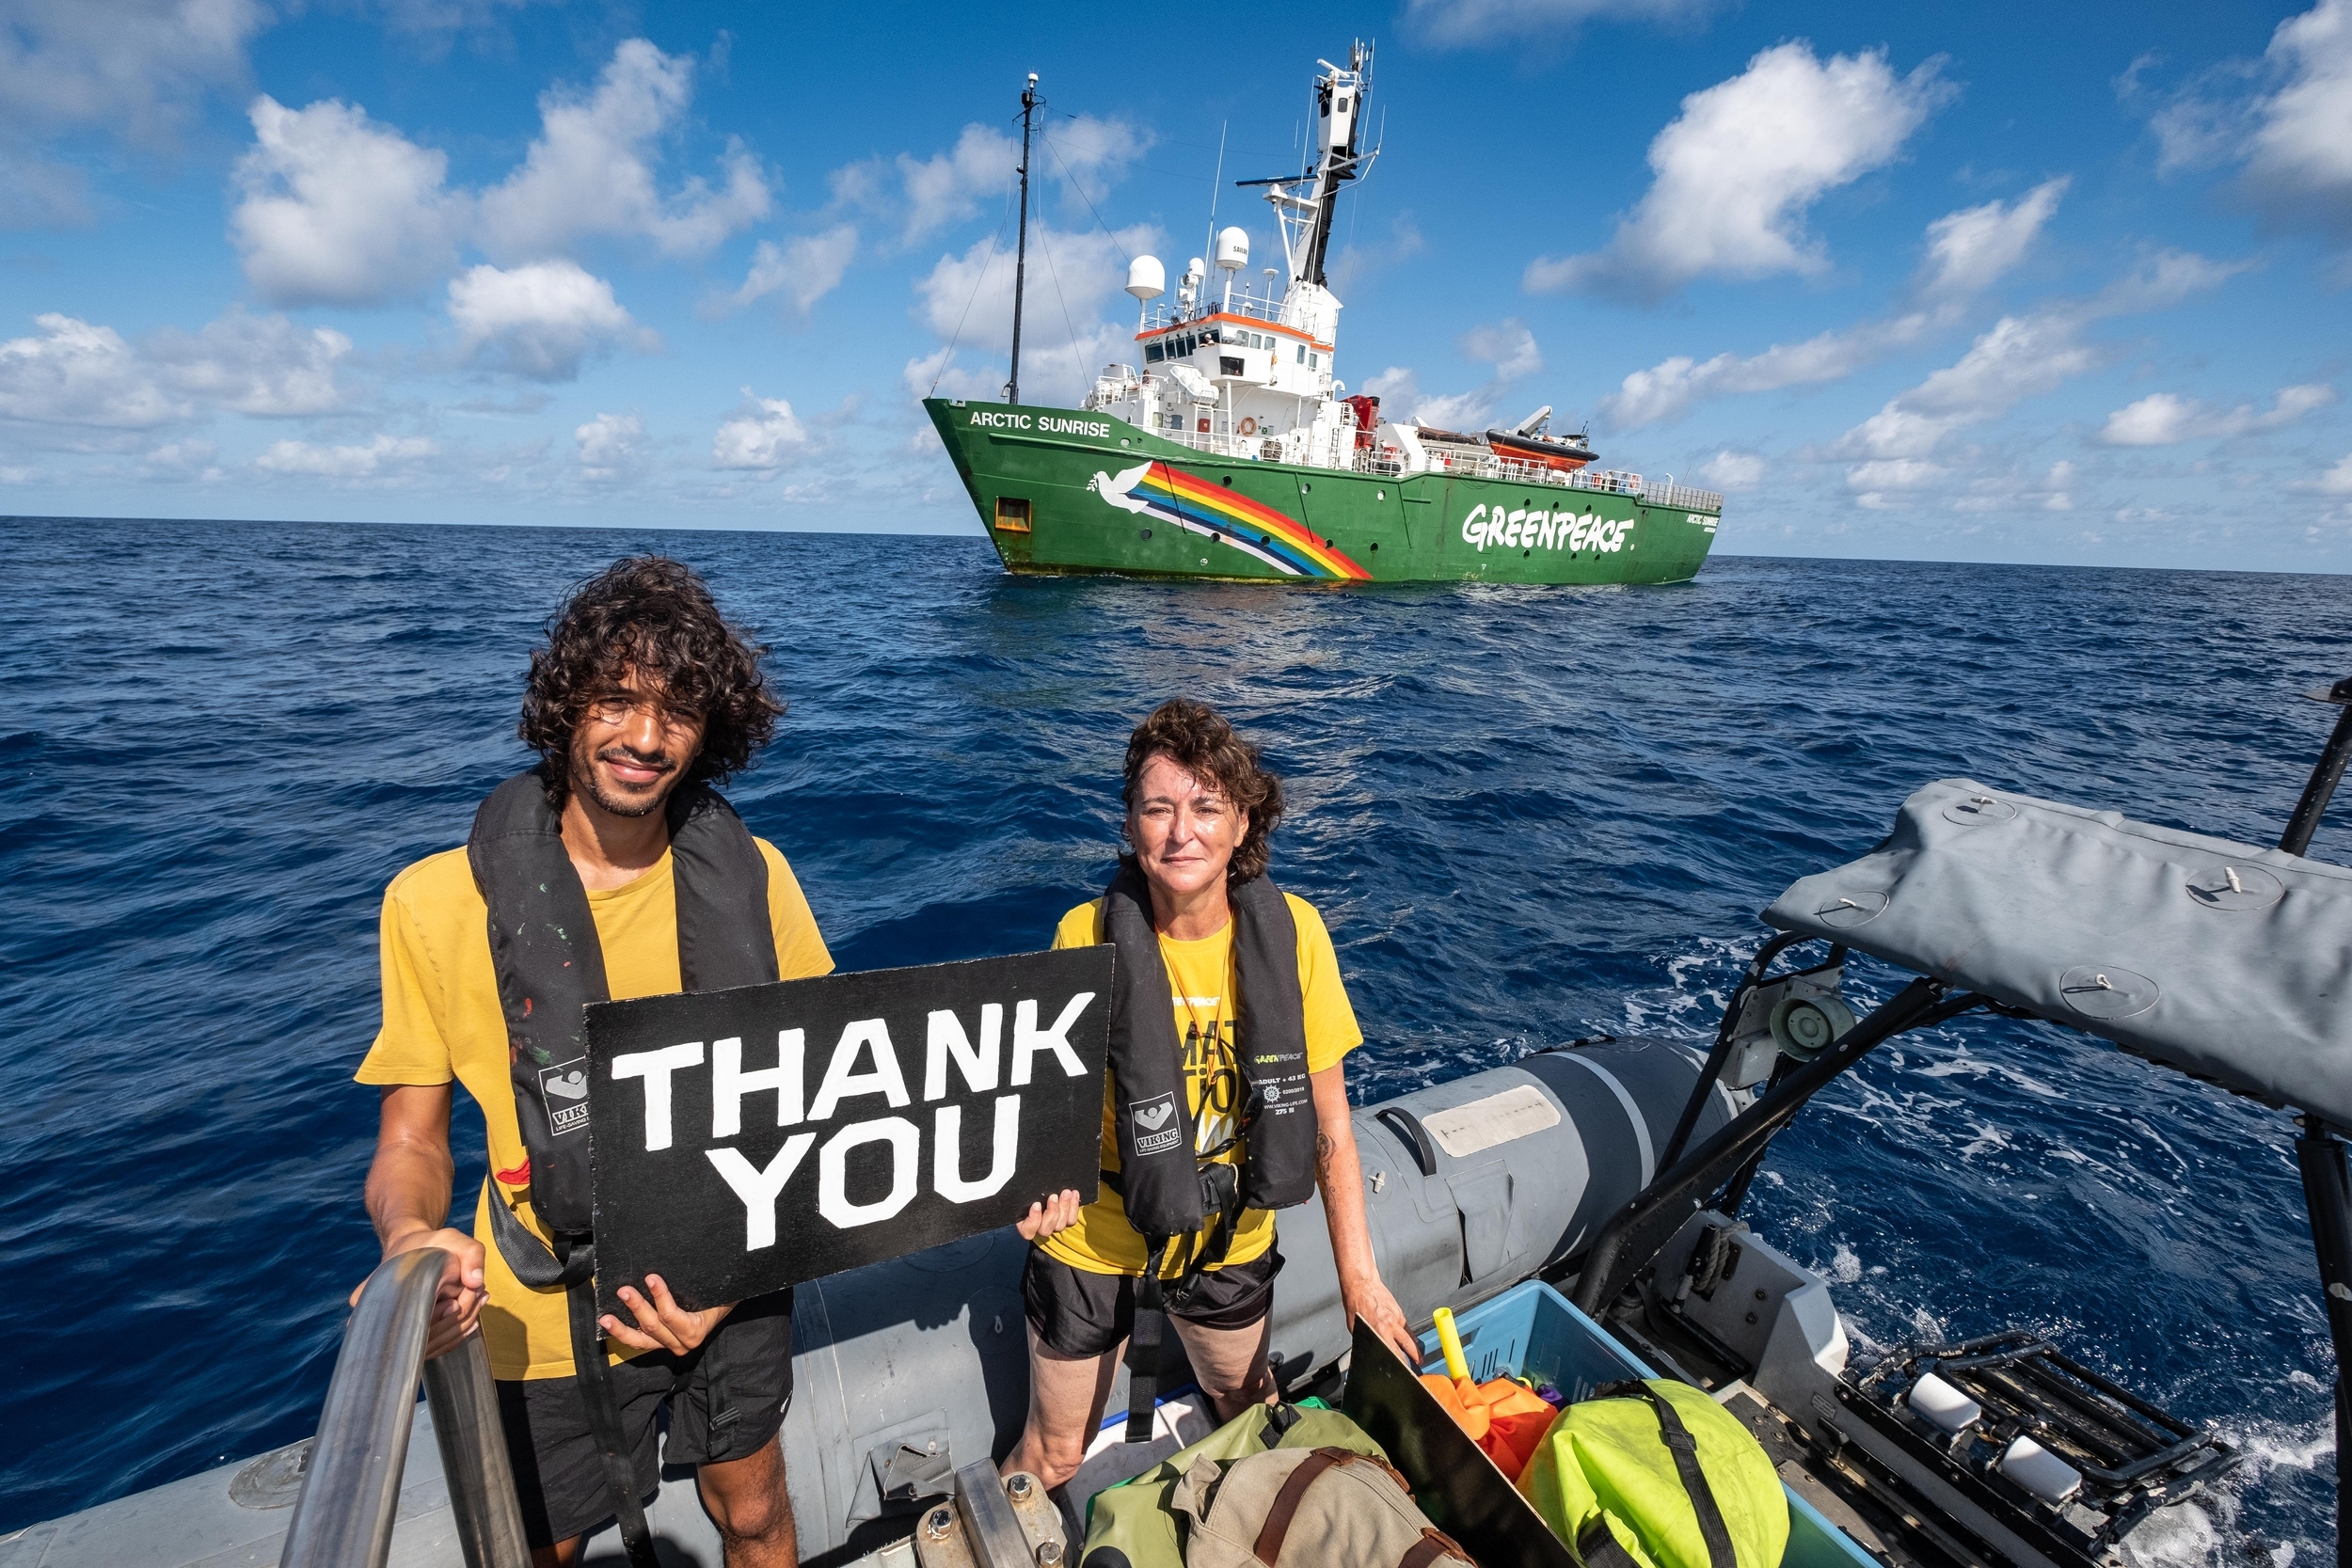 Two people standing on a speedboat in the ocean, holding a sign saying "Thank You". A green ship with "Greenpeace" painted across can be seen behind them.